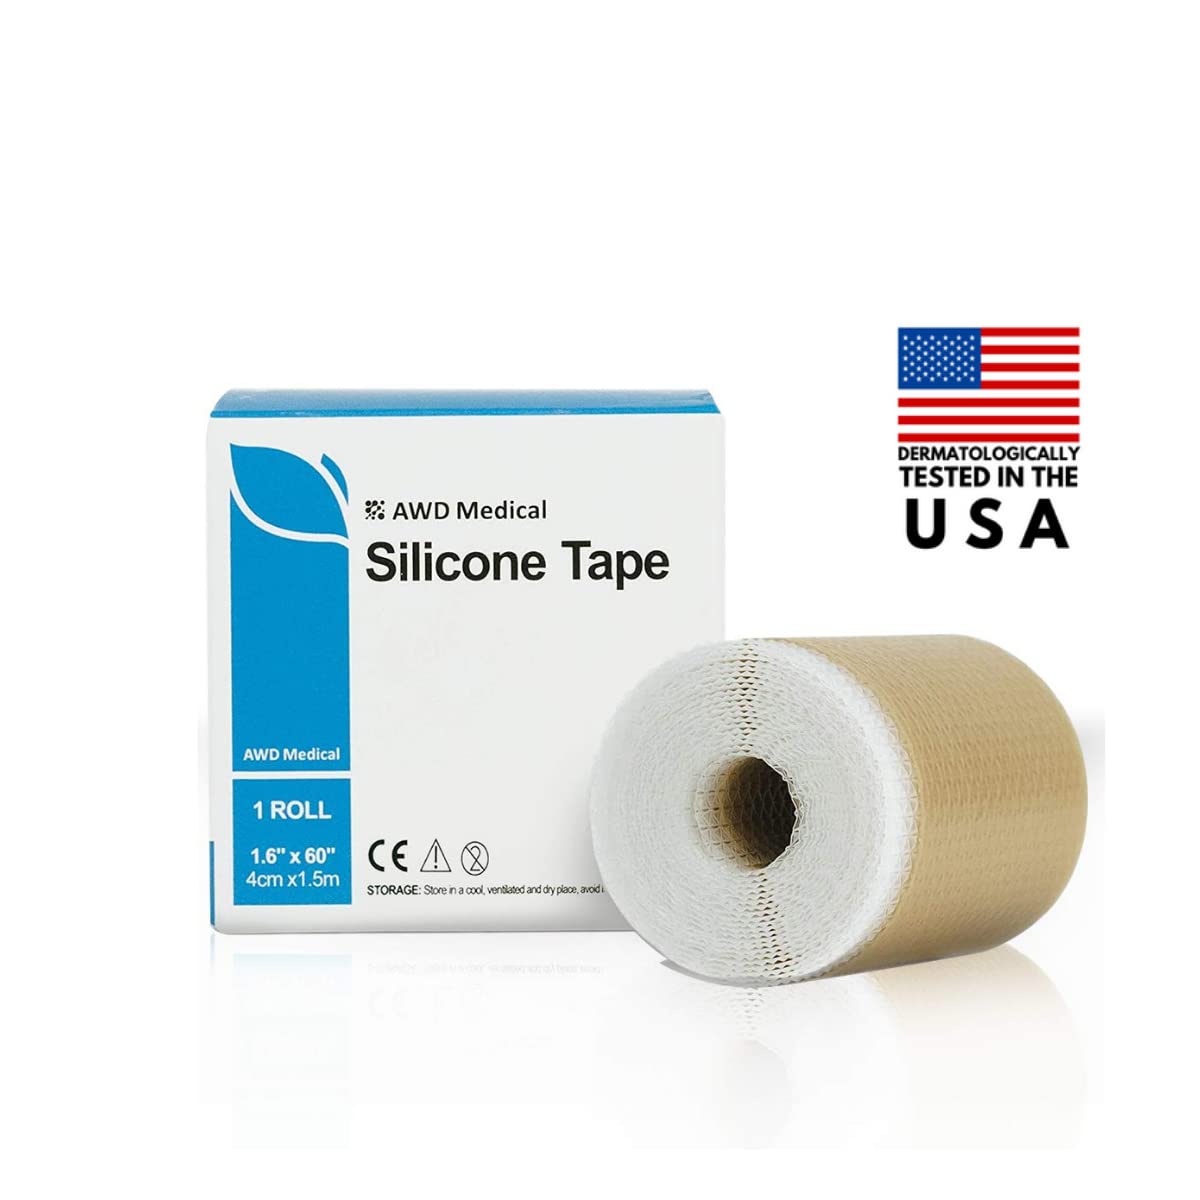 AWD Medical Silicone Scar Sheets - Soft Silicone Scar Tape for Scar Removal  - 1.6” x 60” Roll - Reusable Silicone Tape For Removing Keloids, C Section,  Burns, Surgical Scars - Custom